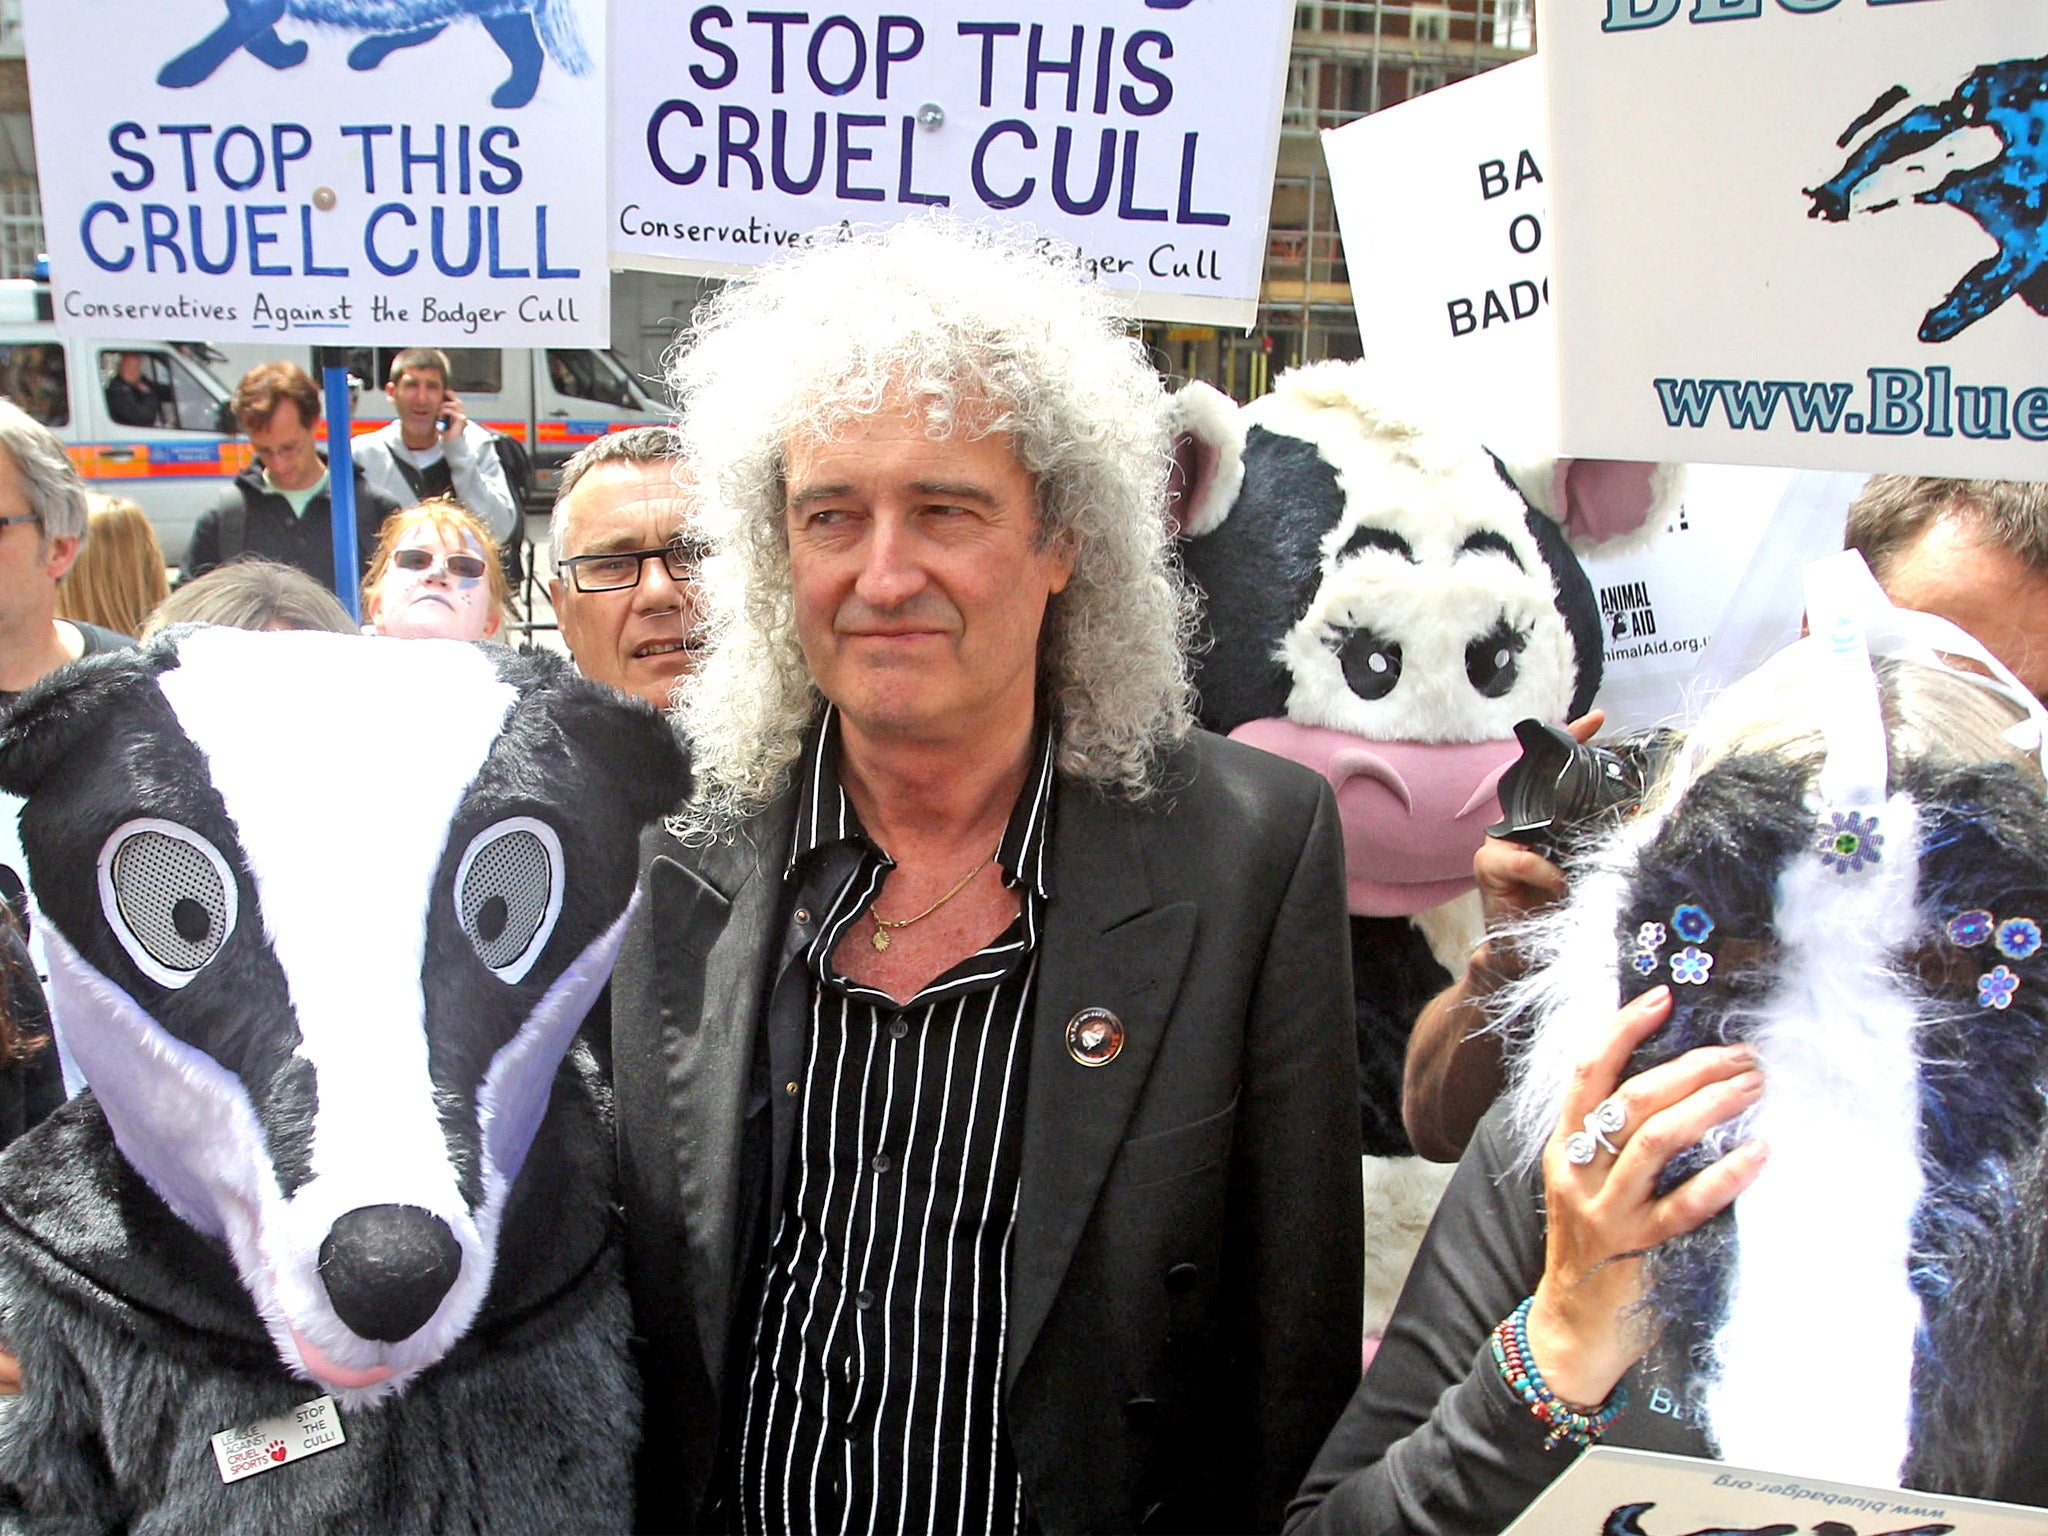 Brian May joins a march against the badger cull plans last week